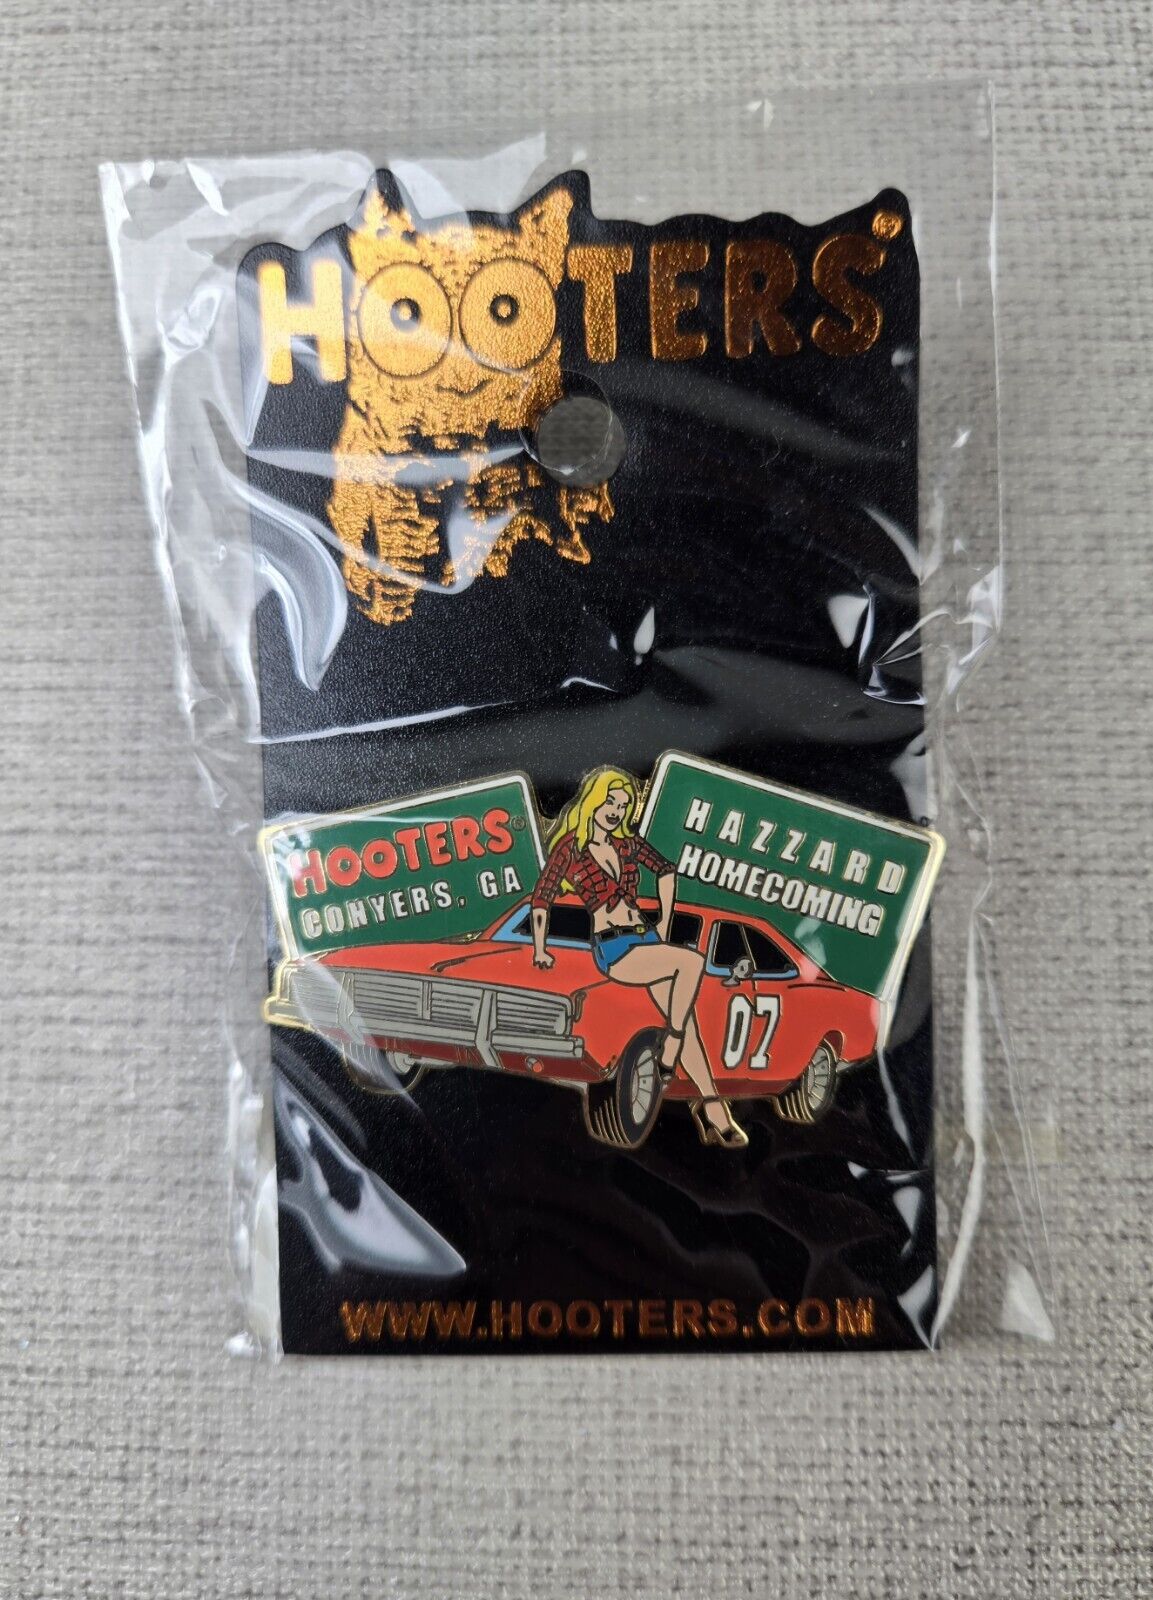 HOOTERS SEXY GIRL DUKES OF HAZZARD CONYERS GA GENERAL LEE PIN - HOMECOMING 